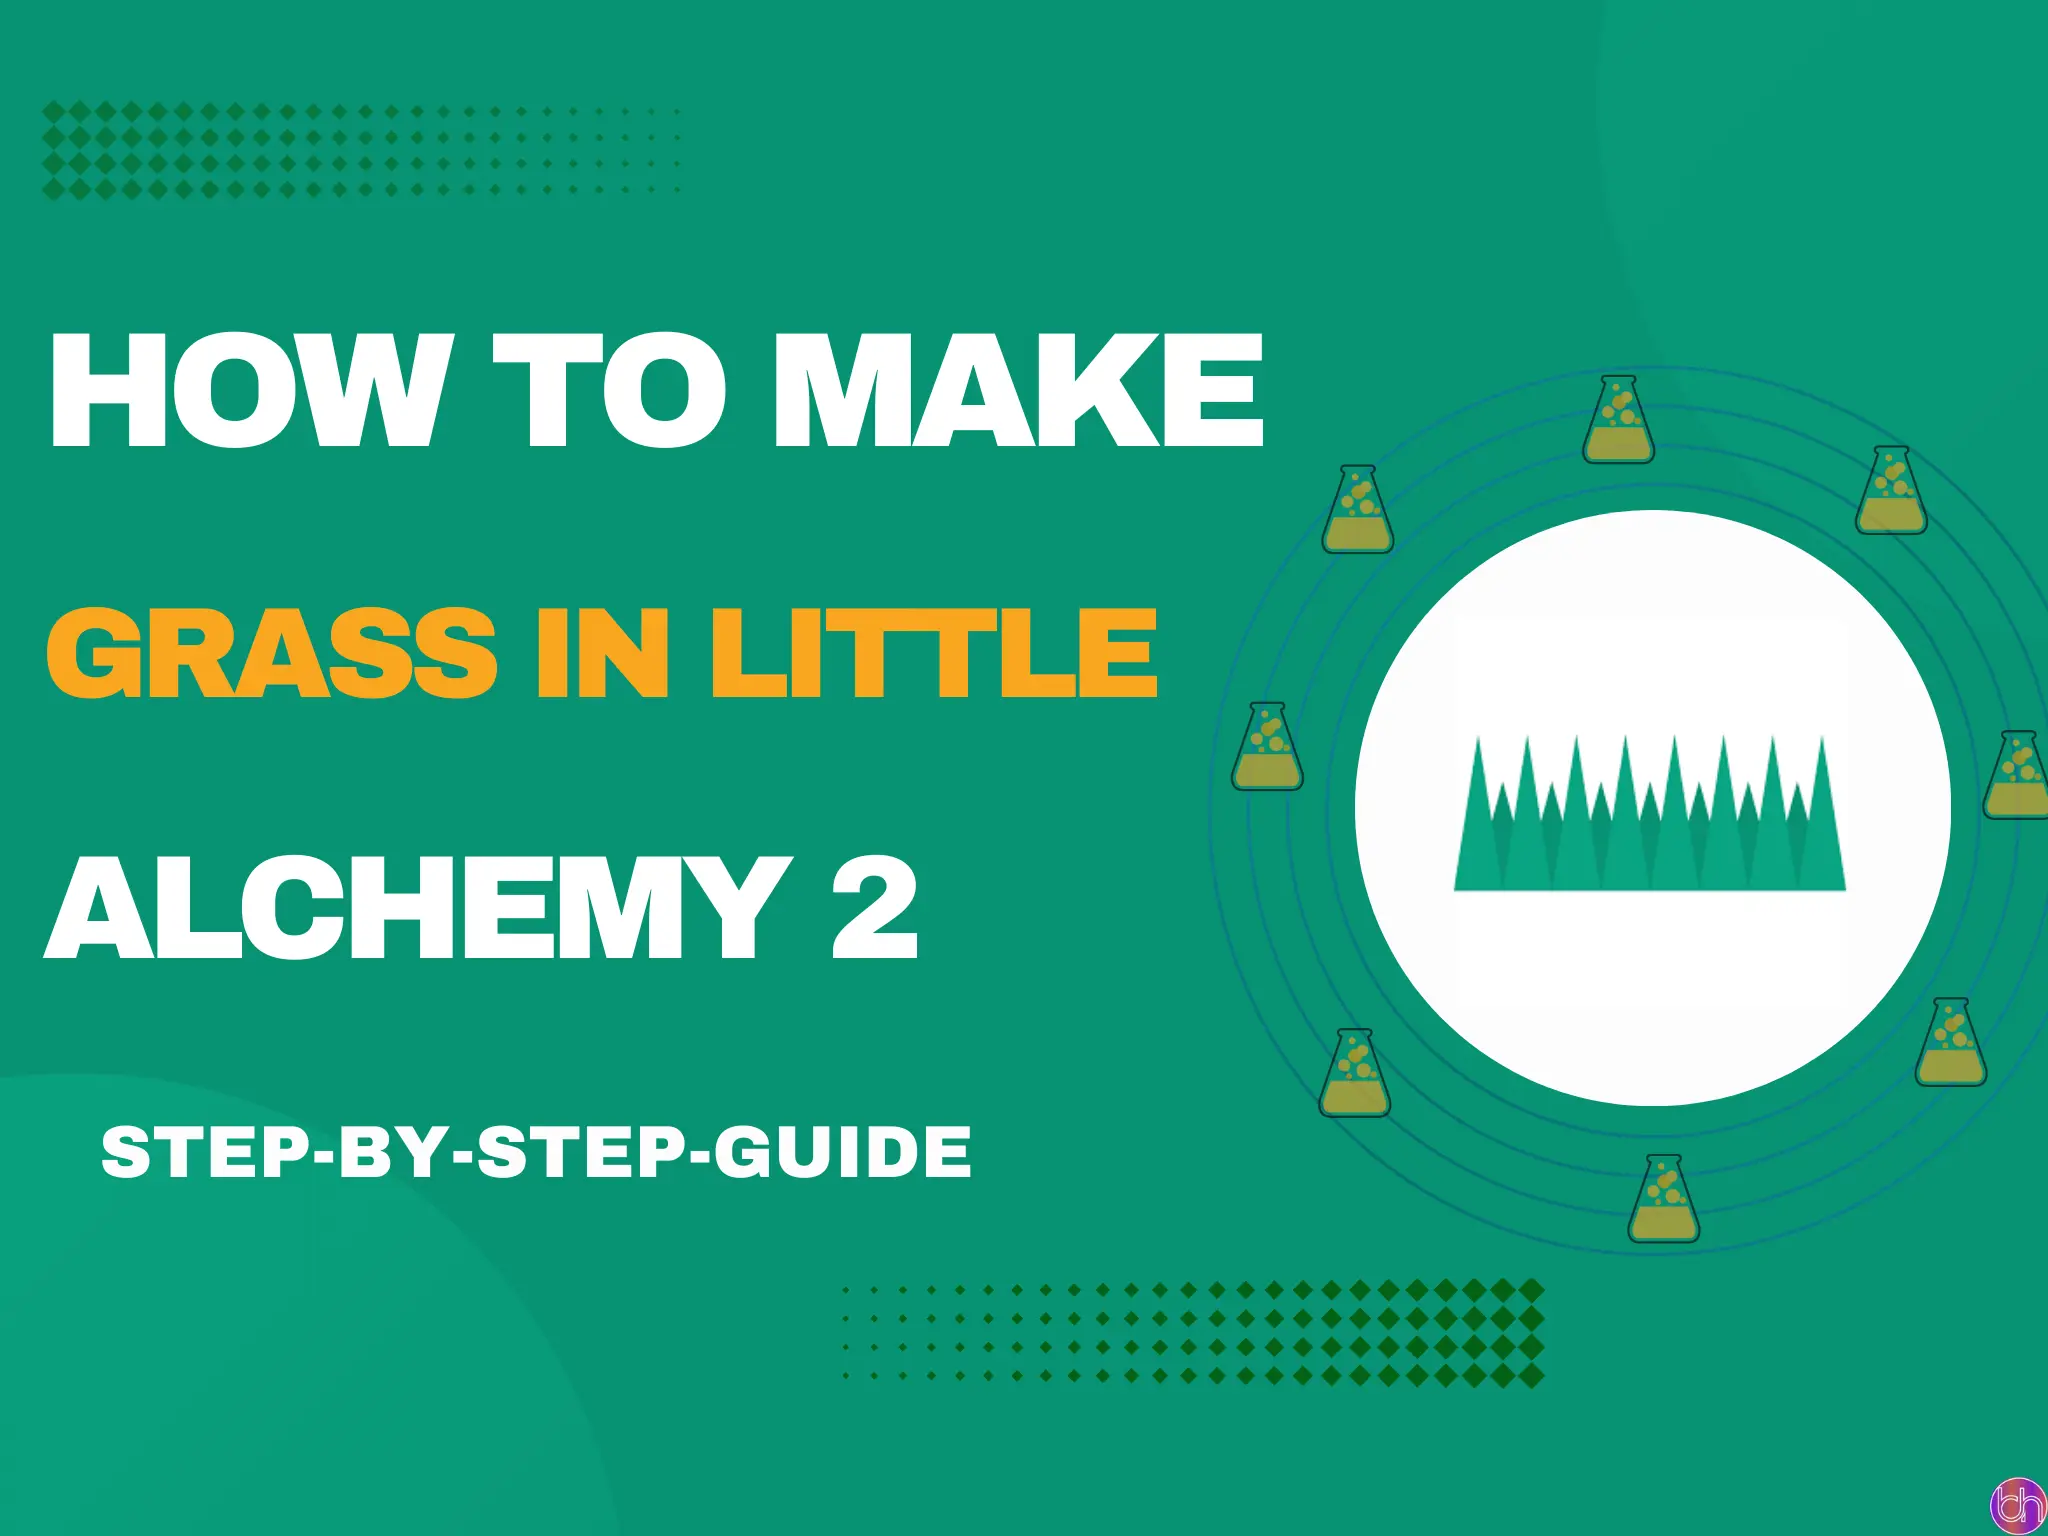 How to make Grass in little alchemy2